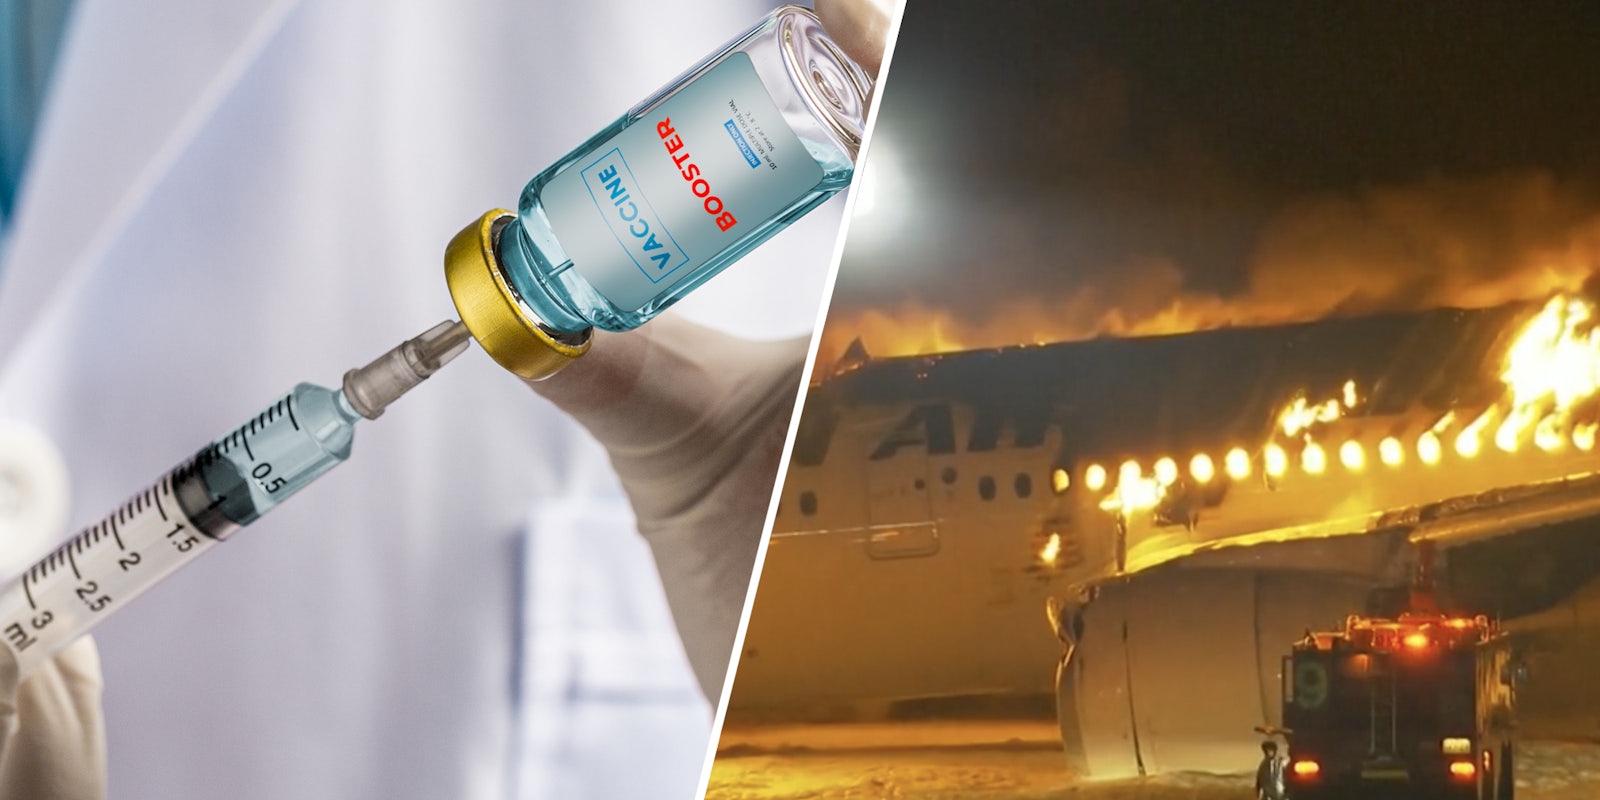 Syringe with vaccine(l), Airplane on fire(r)